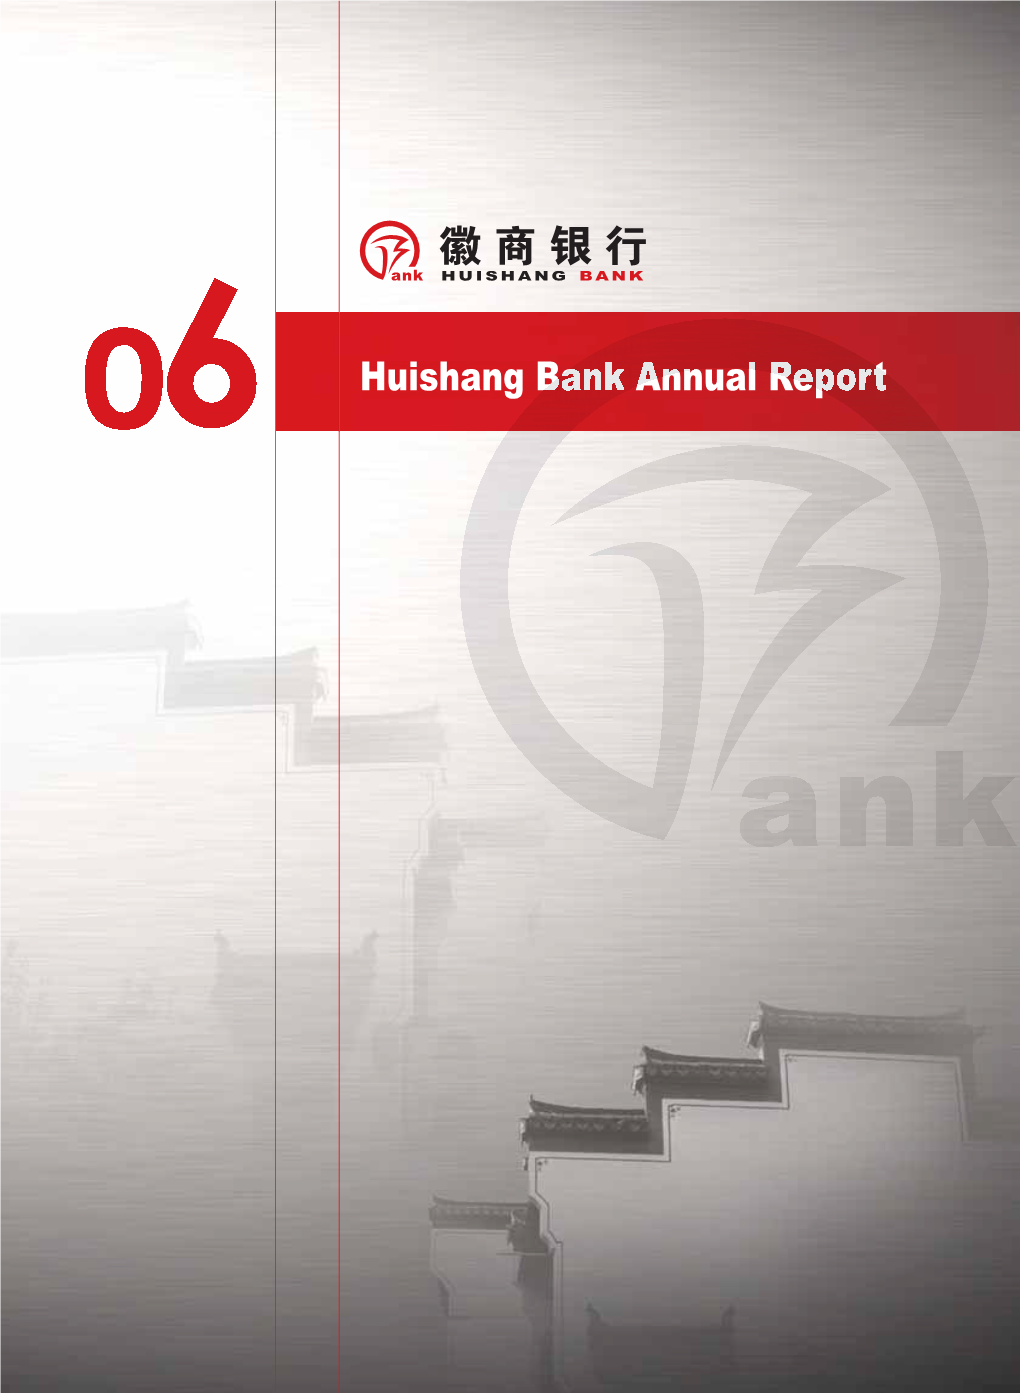 Huishang Bank Annual Report Carry Foward the Tradition of Anhui Merchants and Build Huishang Bank Into a Modern Bank Huishang Bank Annual Report 2006 Management Team